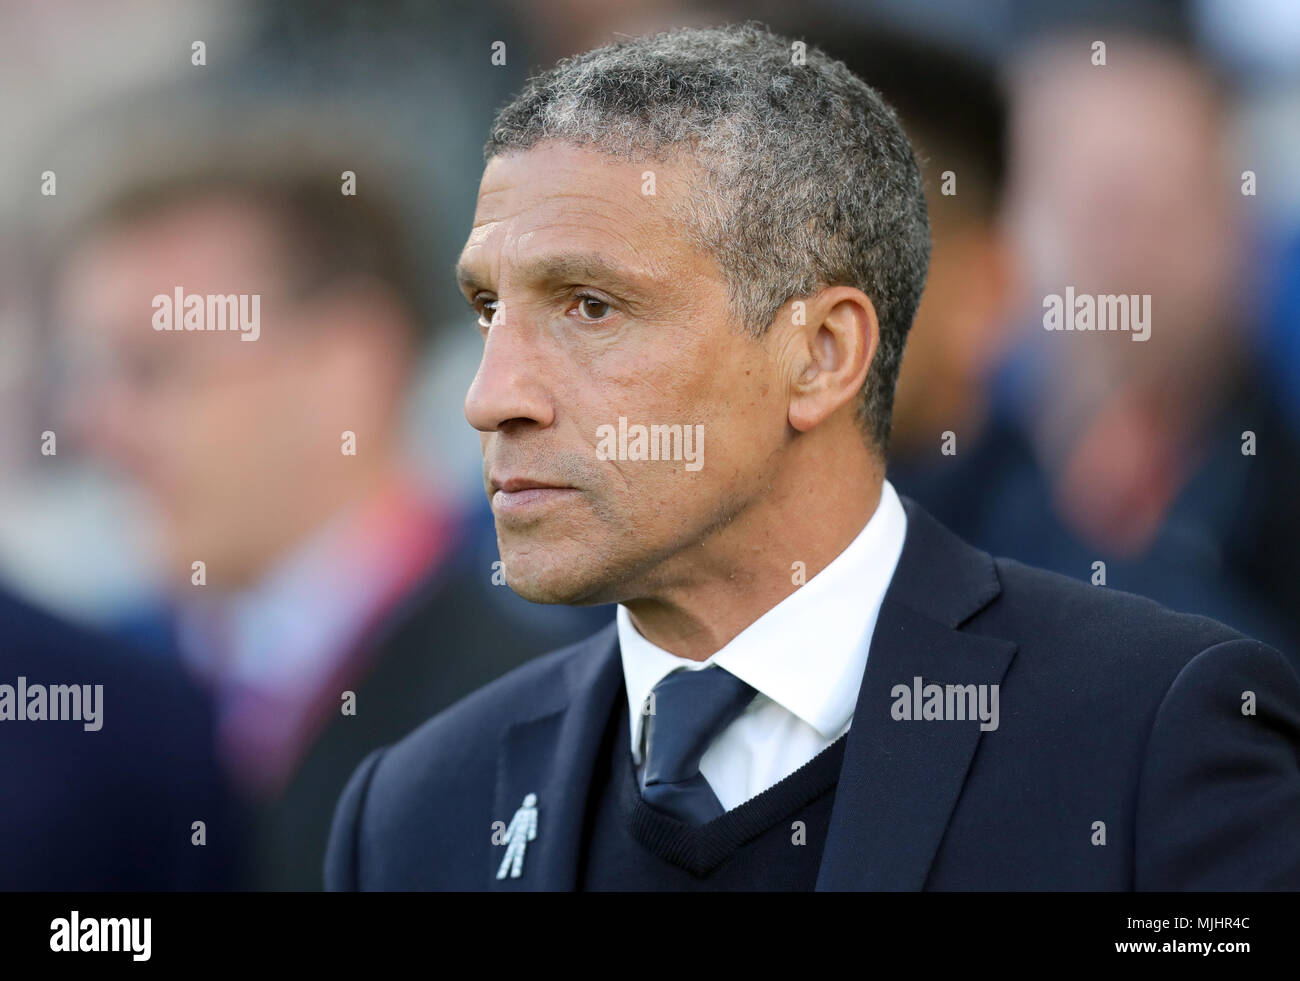 Brighton & Hove Albion manager Chris Hughton during the Premier League match at the AMEX Stadium, Brighton. PRESS ASSOCIATION Photo. Picture date: Friday May 4, 2018. See PA story SOCCER Brighton. Photo credit should read: Gareth Fuller/PA Wire. RESTRICTIONS: No use with unauthorised audio, video, data, fixture lists, club/league logos or 'live' services. Online in-match use limited to 75 images, no video emulation. No use in betting, games or single club/league/player publications. Stock Photo